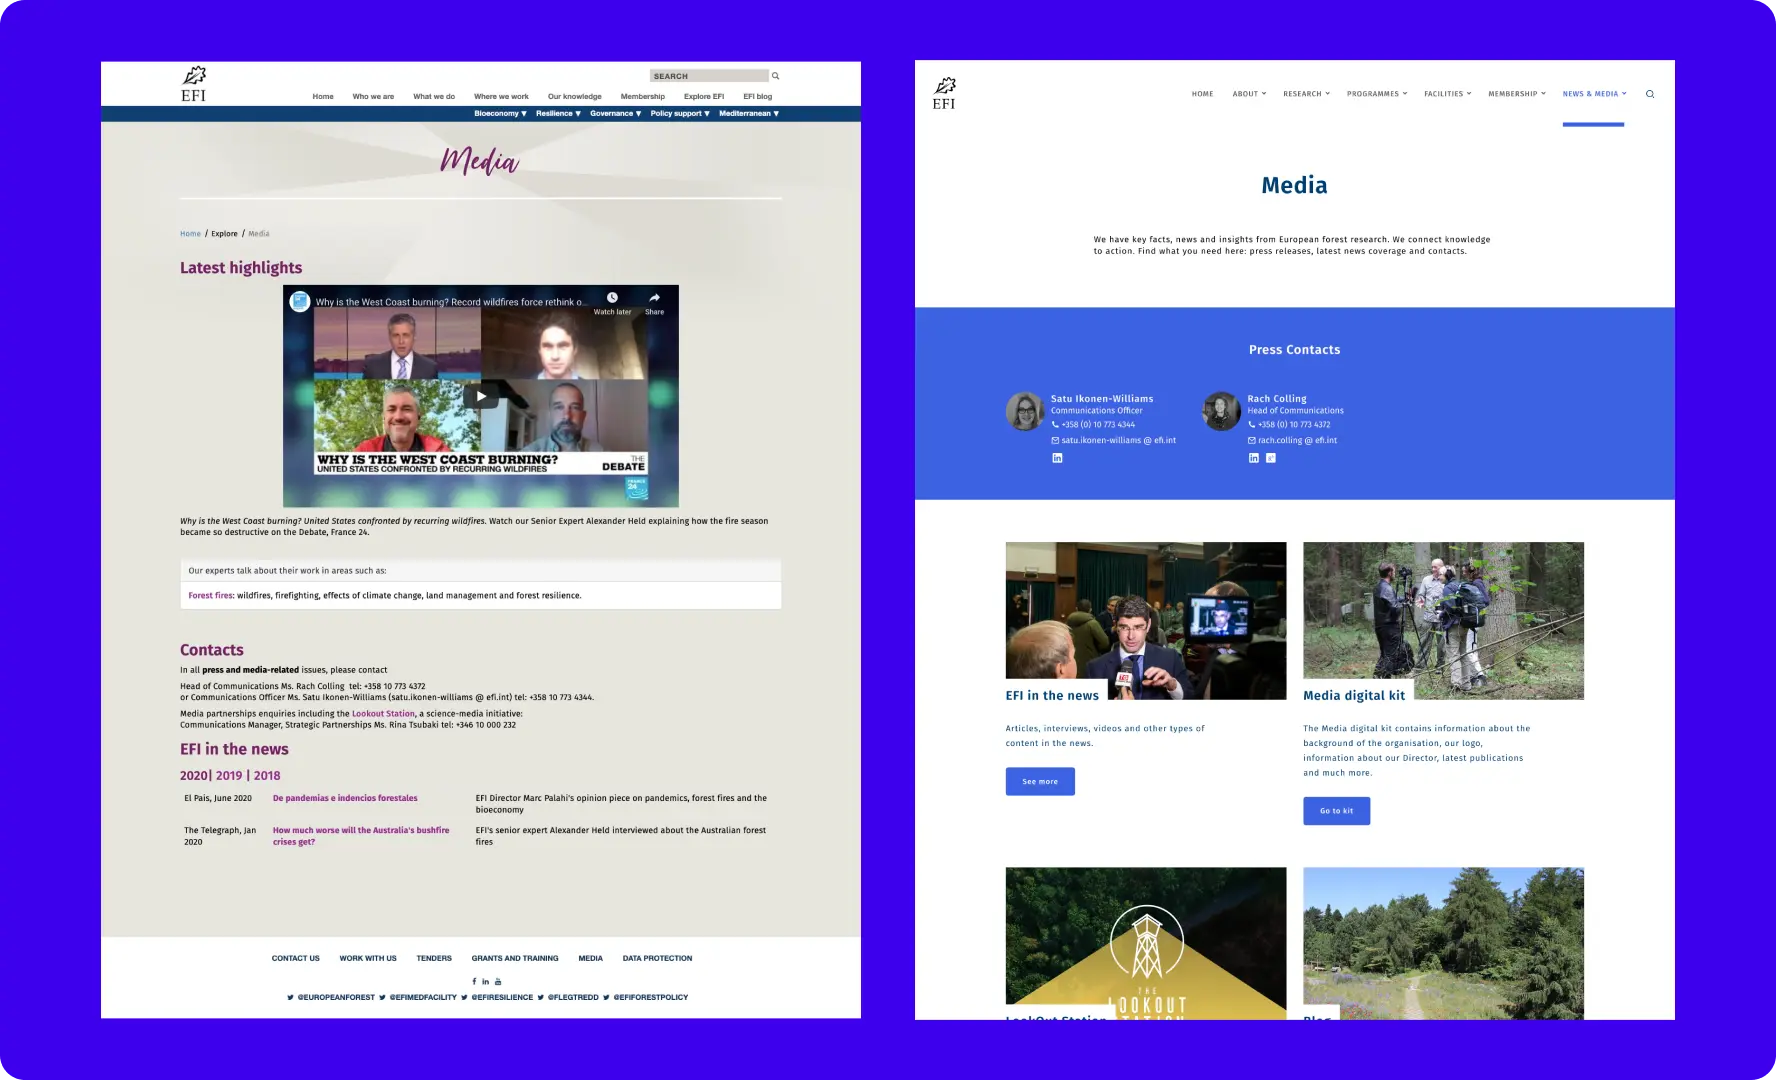 Two pages related to the website, namely the older one on the left and the present one on the right